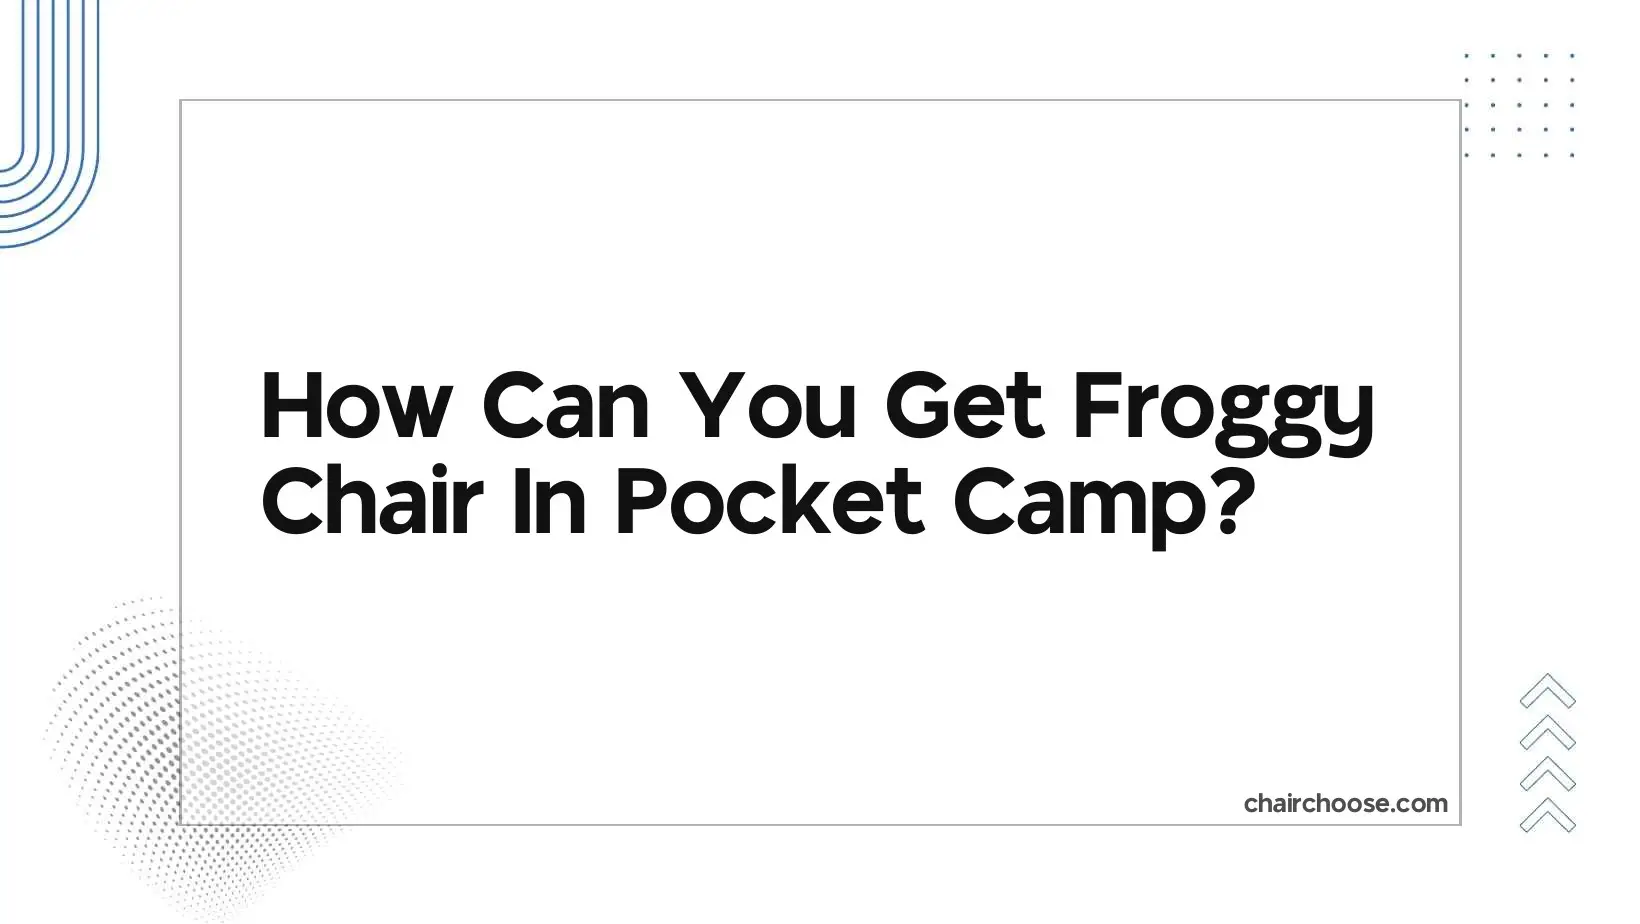 How Can You Get Froggy Chair In Pocket Camp?